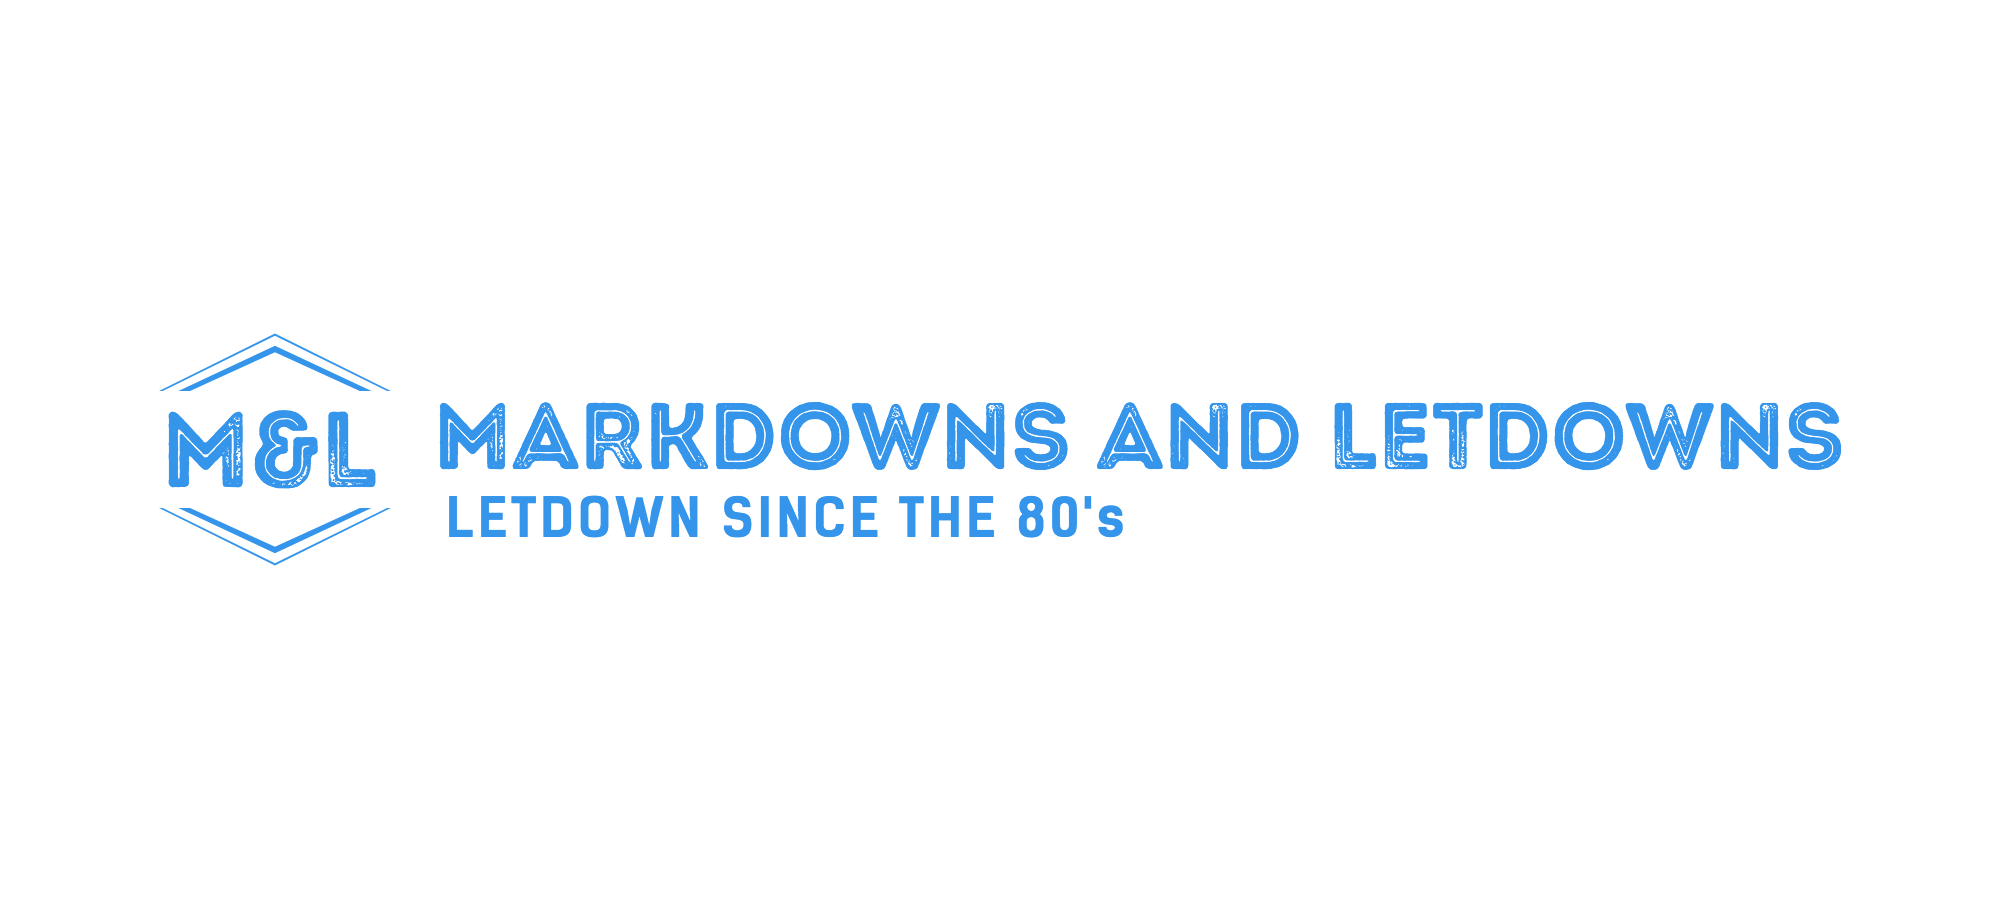 Markdowns and Letdowns